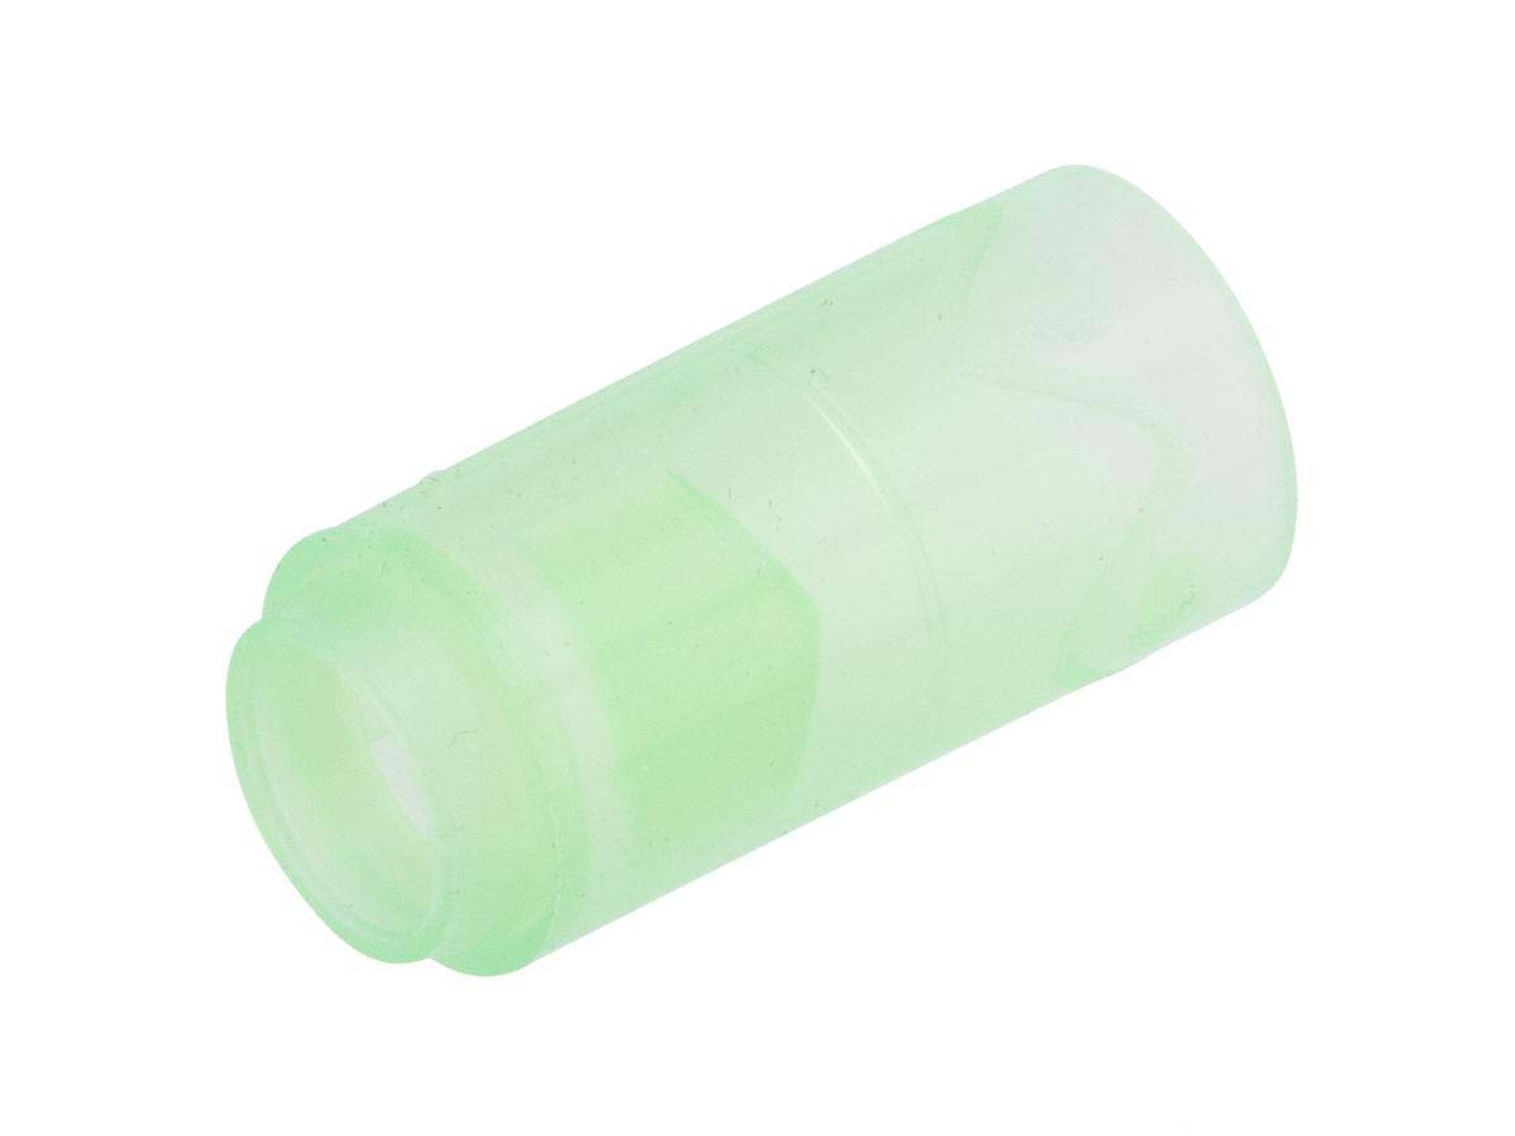 Maple Leaf Mr. Hop Silicone Hop-Up Bucking for Airsoft AEG Rifles (Type: 50 / Green)